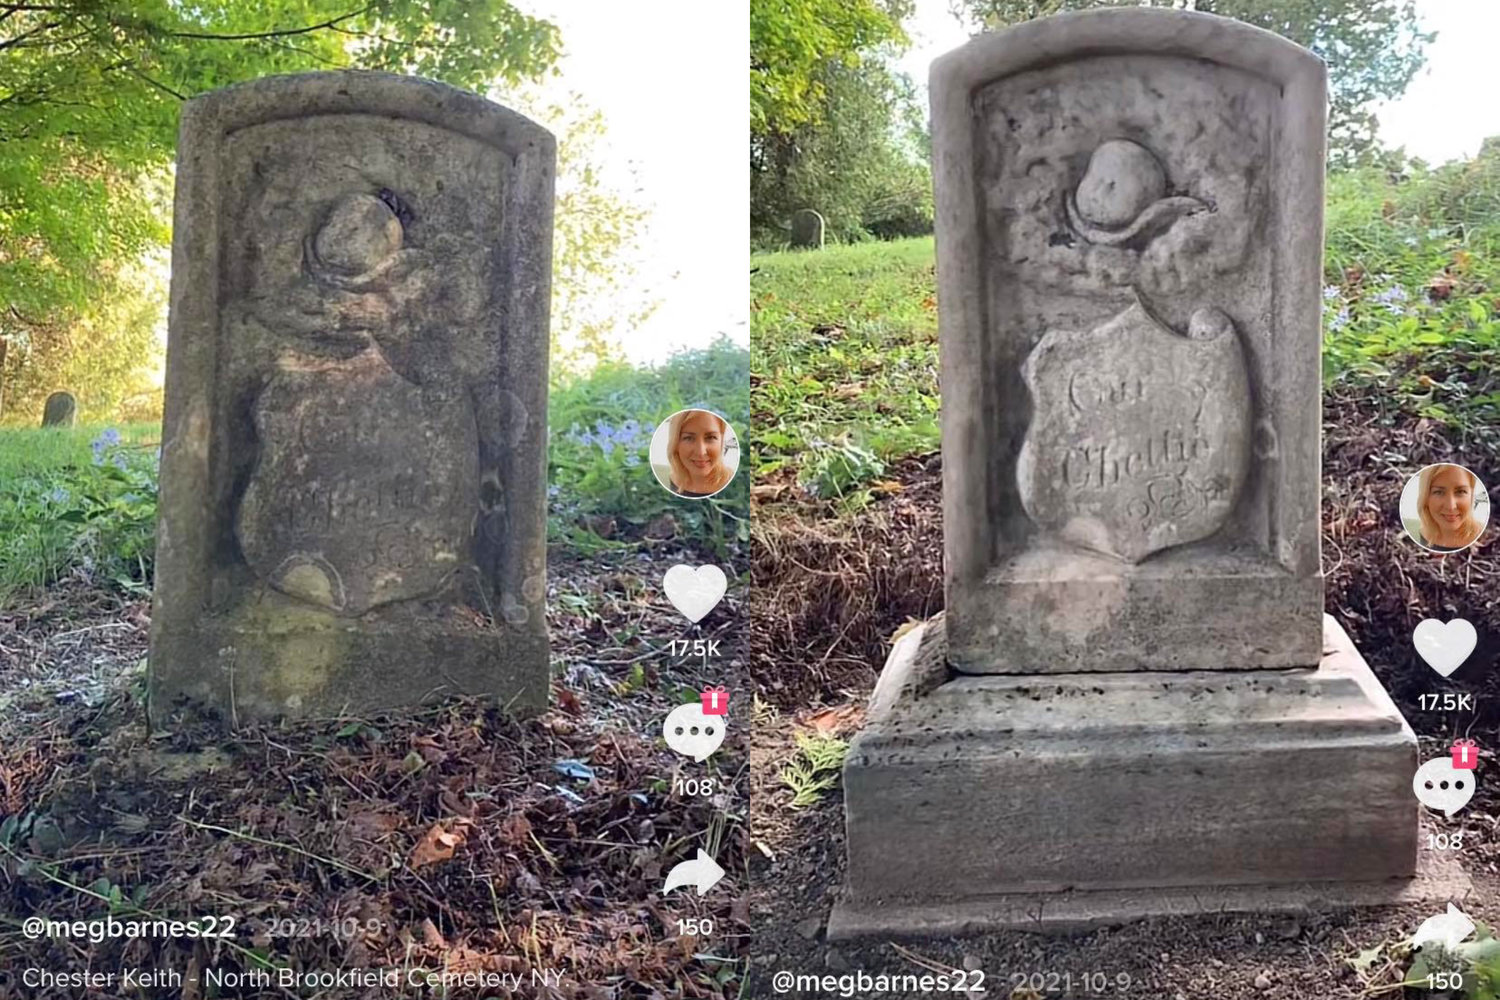 Pictured is the headstone of Chester Keith, located at North Brookfield Cemetery. On the left is before Megan Barnes cleaned the stone; on the right is after.